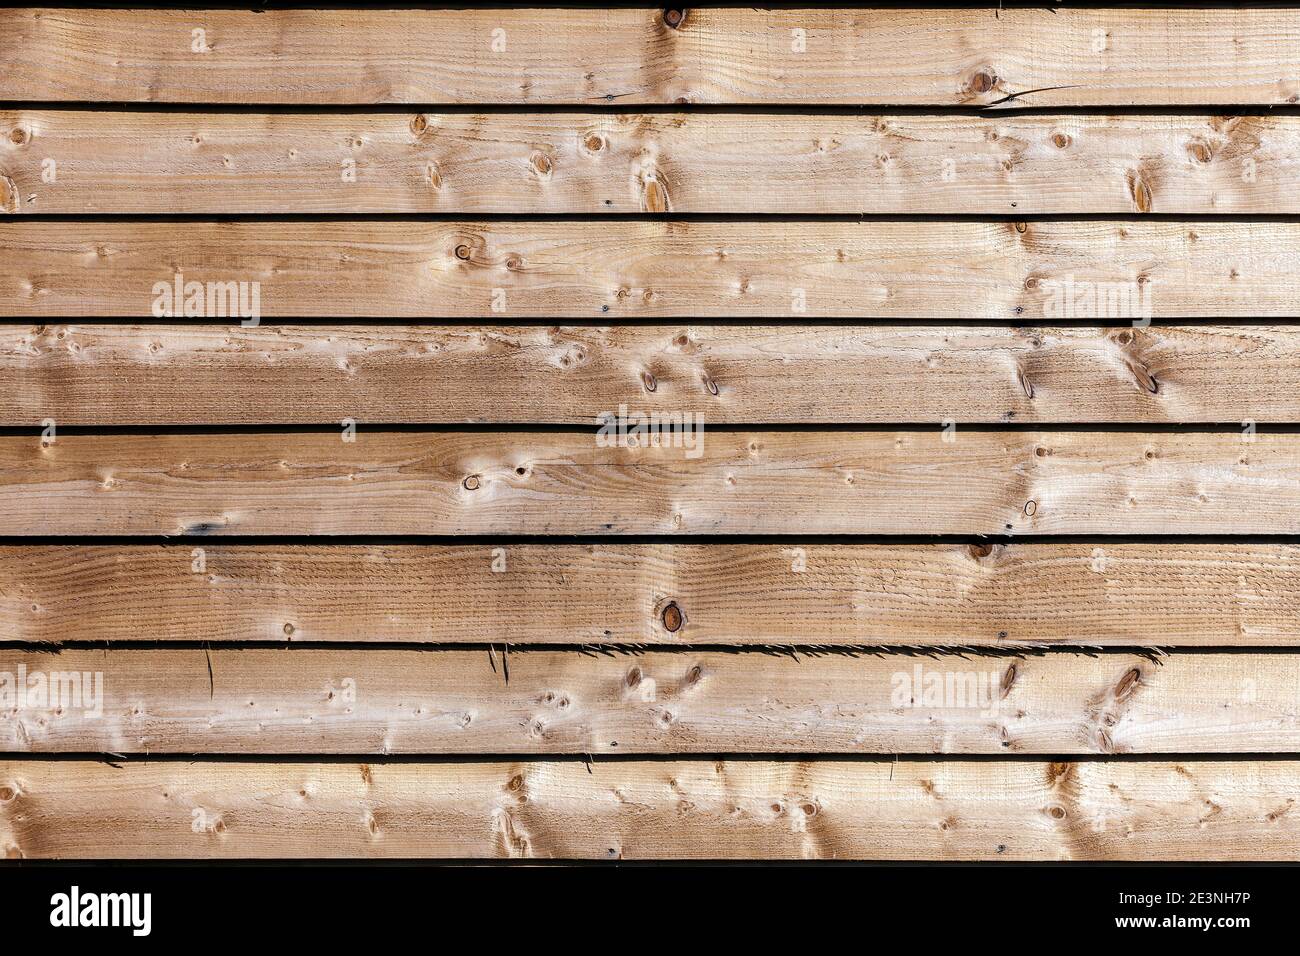 New modern brown wooden fence panel background with rough knotted grain timber texture, stock photo image Stock Photo